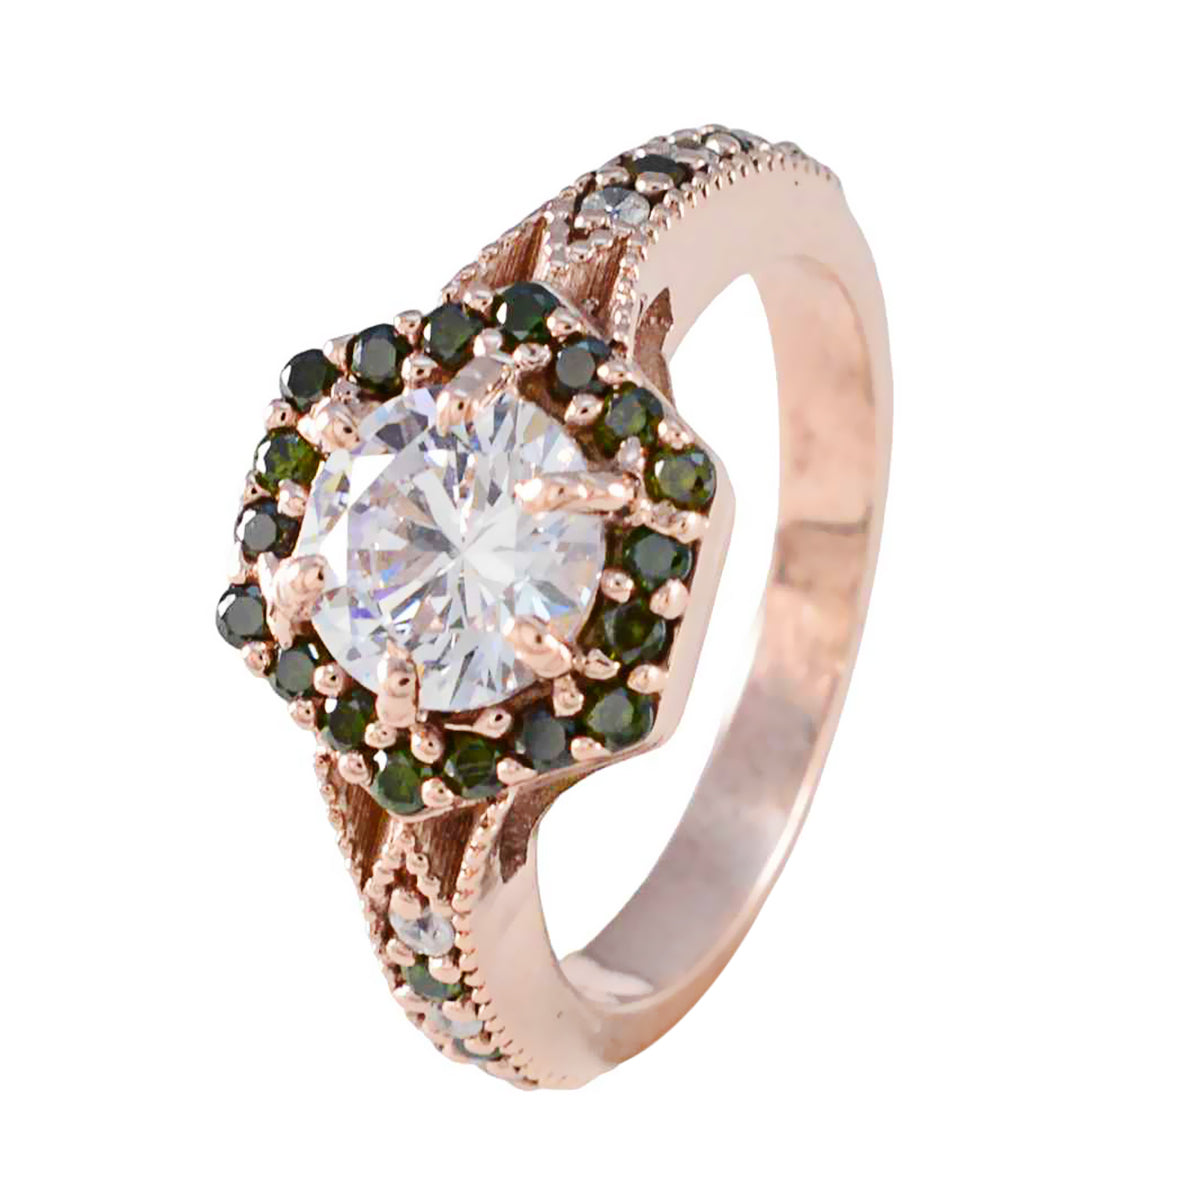 Riyo Classical Silver Ring With Rose Gold Plating Blue Sapphire Stone Round Shape Prong Setting Handamde Jewelry Cocktail Ring